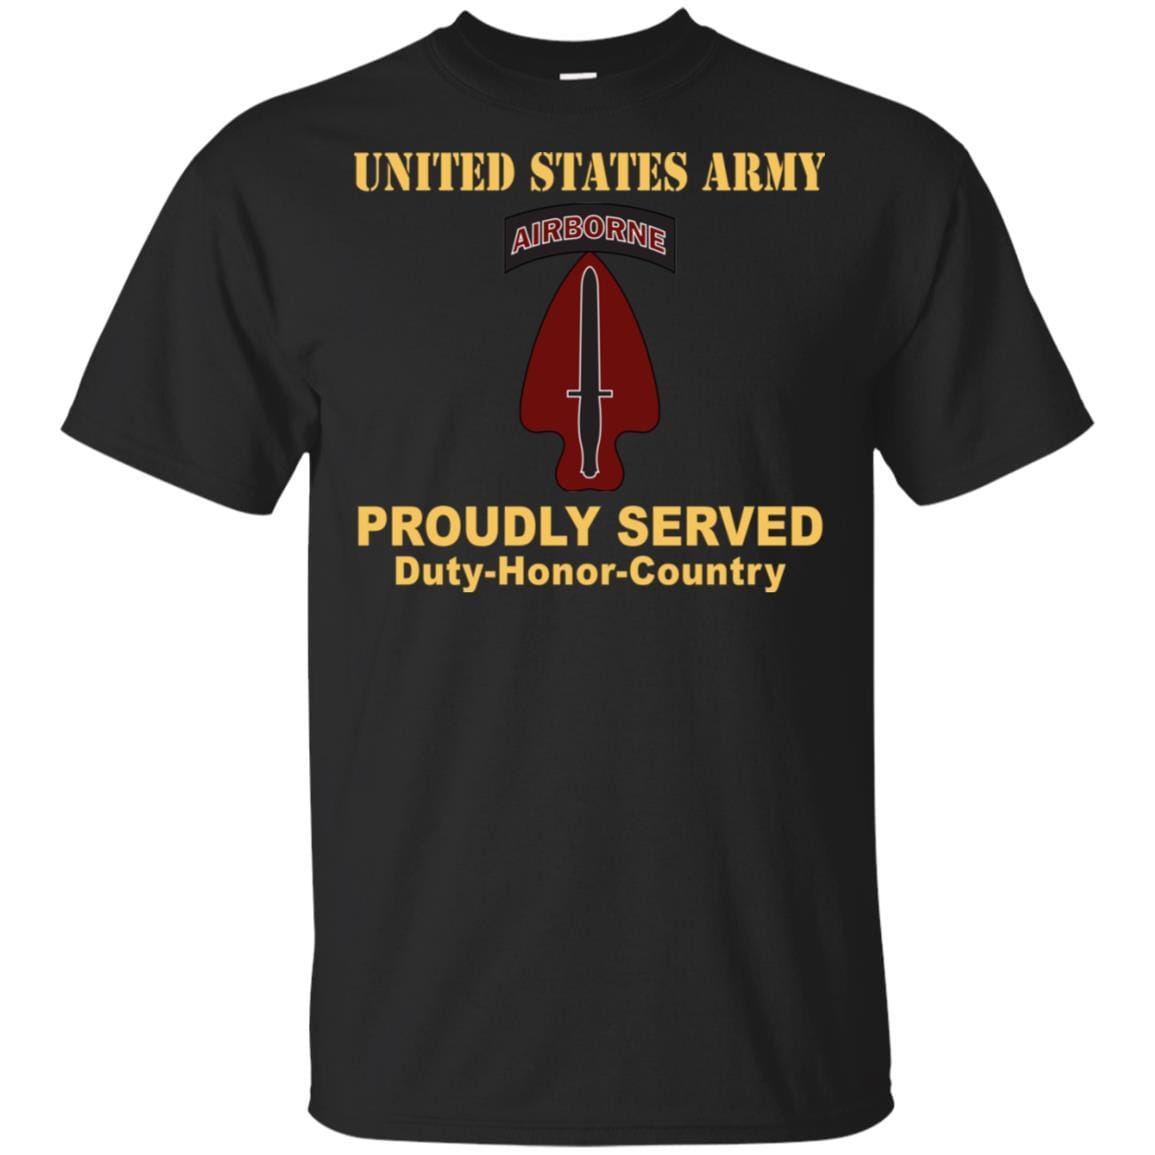 U.S. ARMY SPECIAL OPERATIONS COMMAND- Proudly Served T-Shirt On Front For Men-TShirt-Army-Veterans Nation